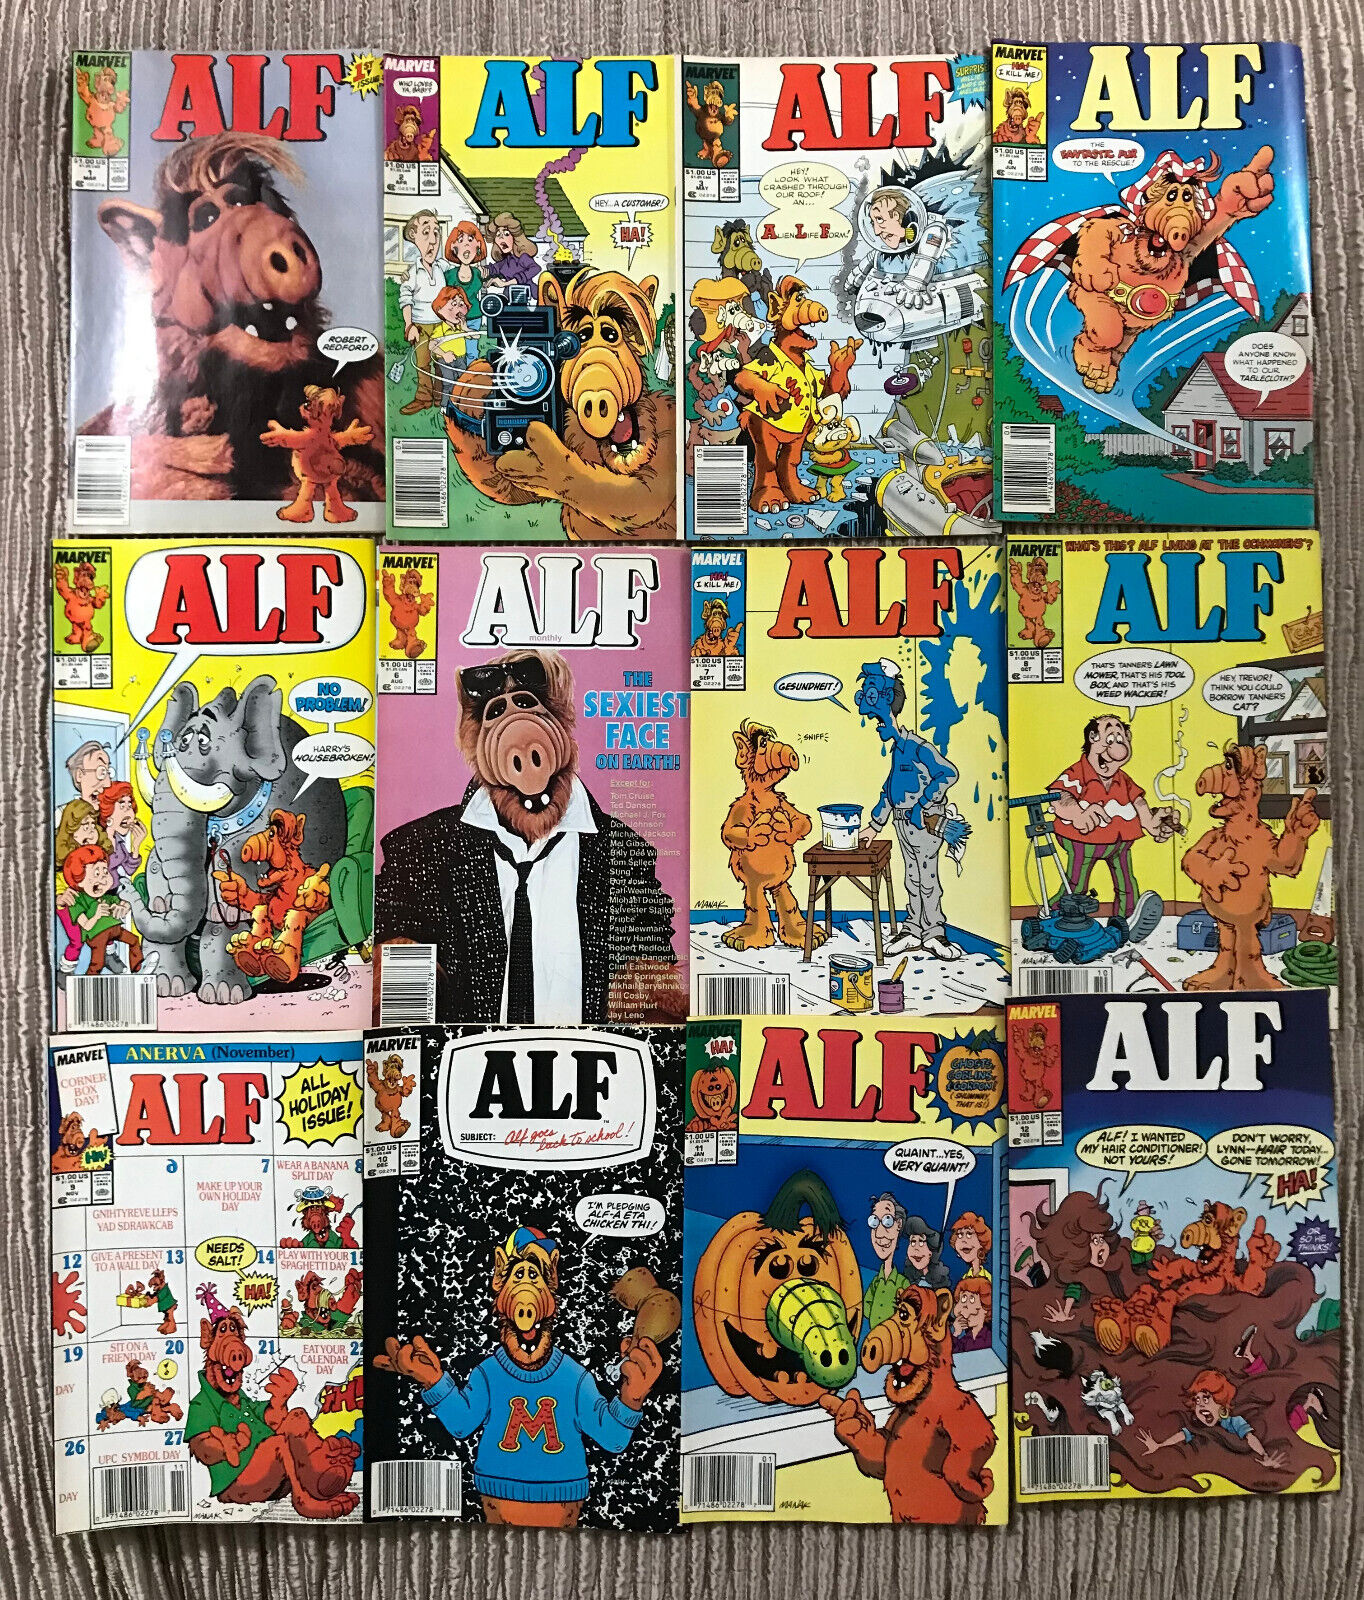 ALF COMICS ENTIRE COLLECTION EVERY ISSUE # 1-50 w # 48 PLUS 7 SUPER-SIZED ISSUES